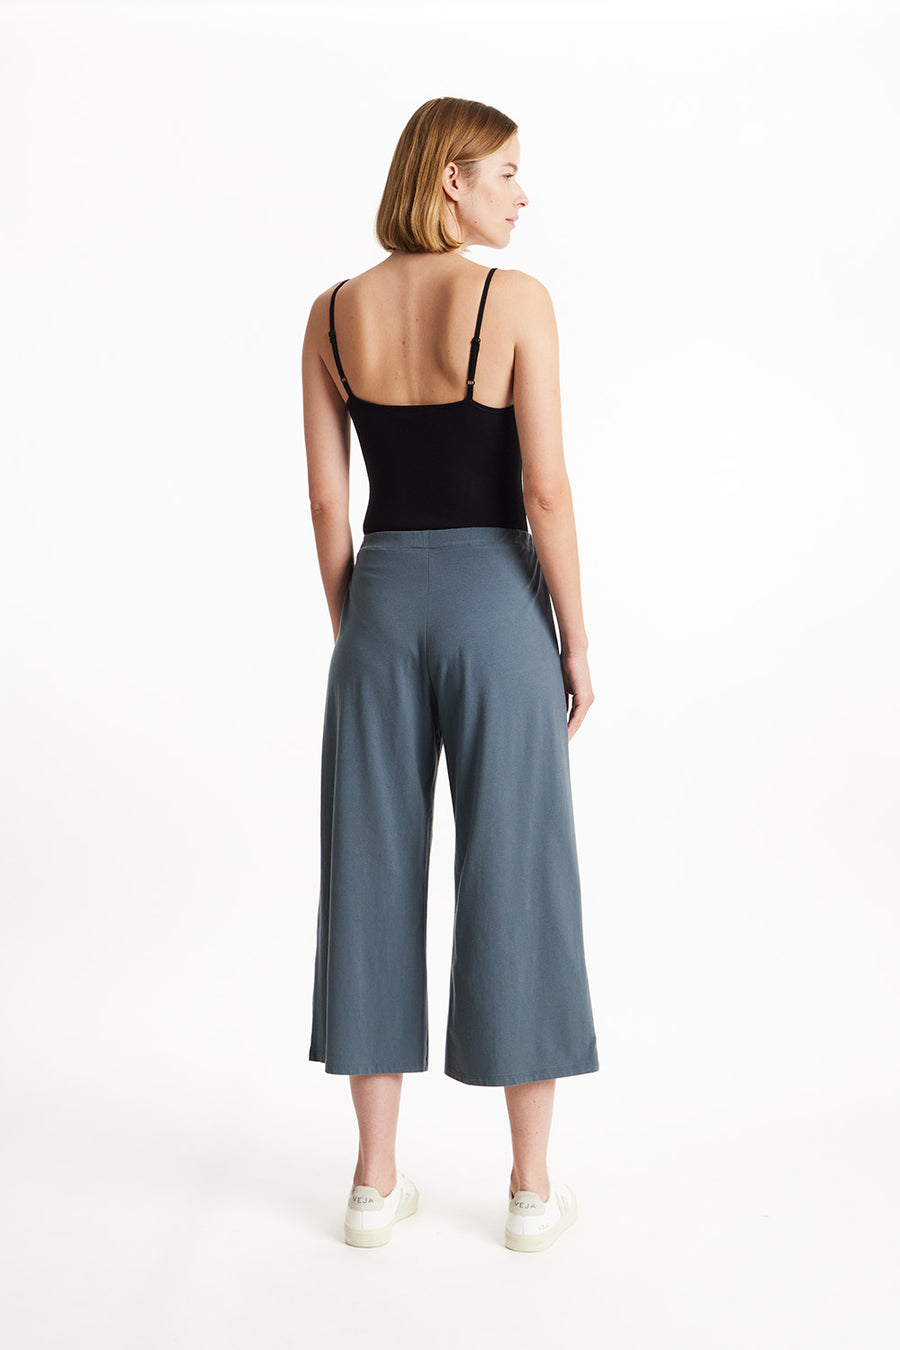 Rear view of a blonde model wearing cropped grey wide leg Chandre trousers by People Tree over a black bodysuit